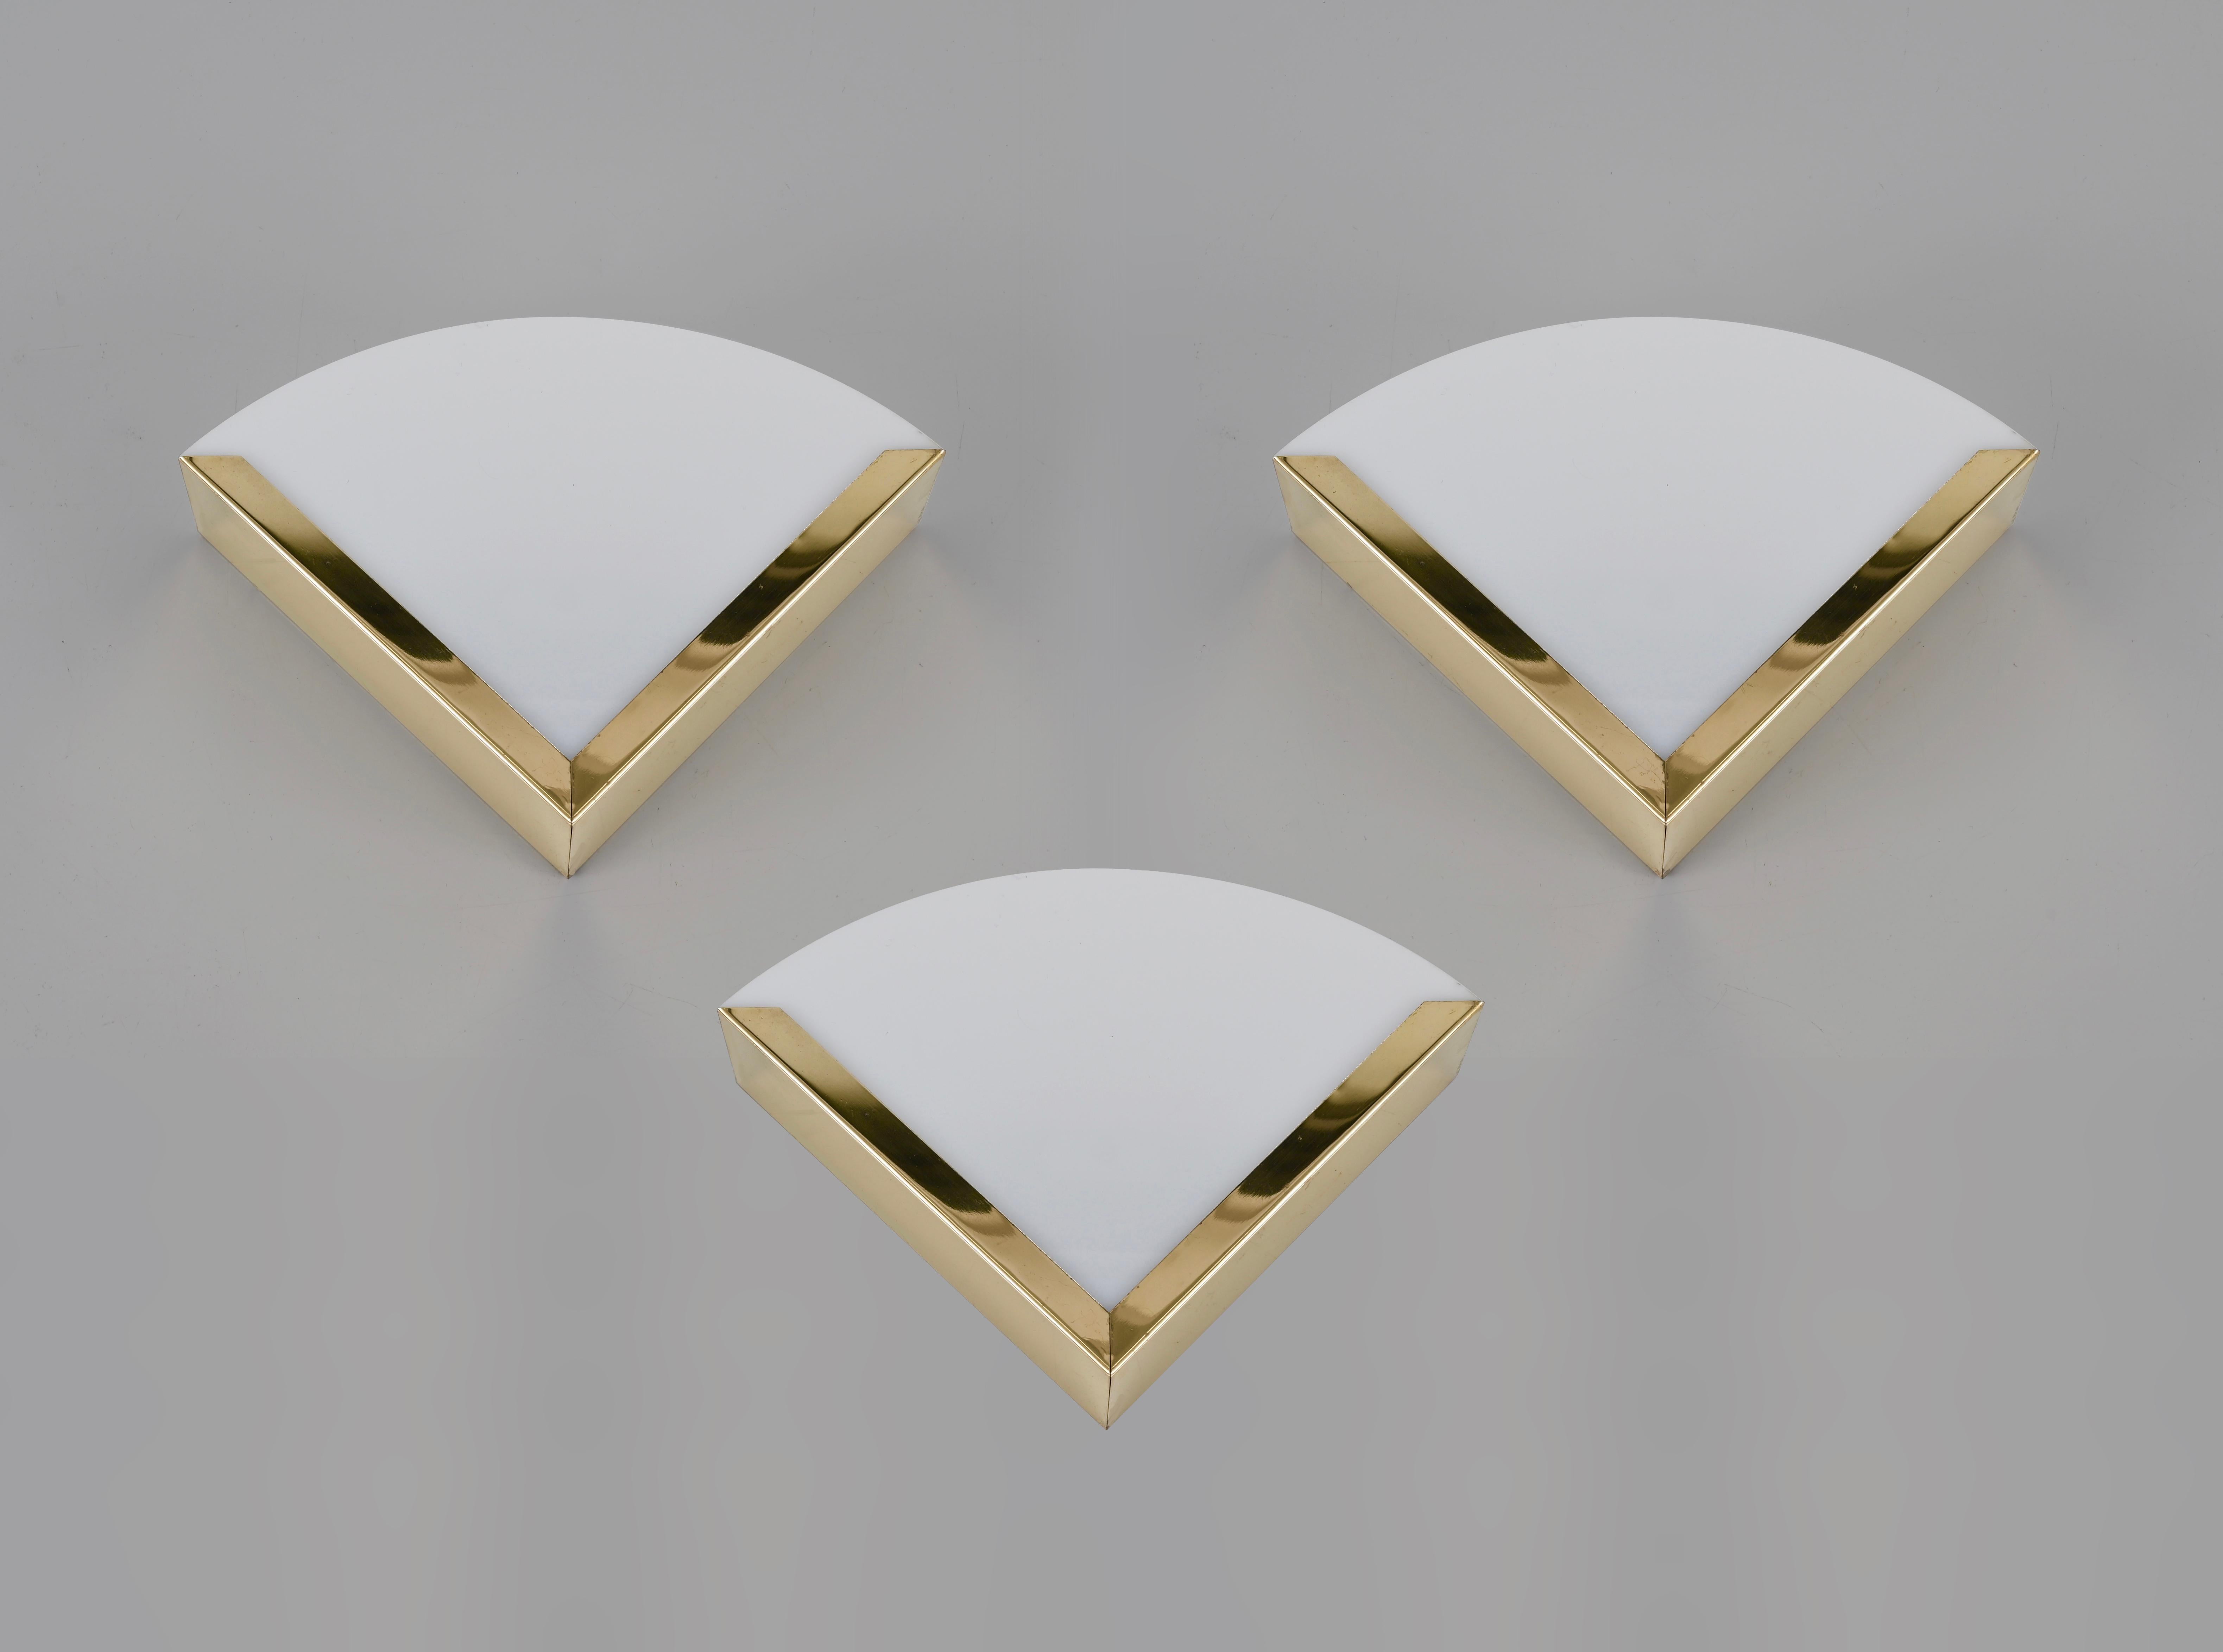 Italian Triangular Sconces in Brass and White Perspex, Italy 1970s For Sale 1